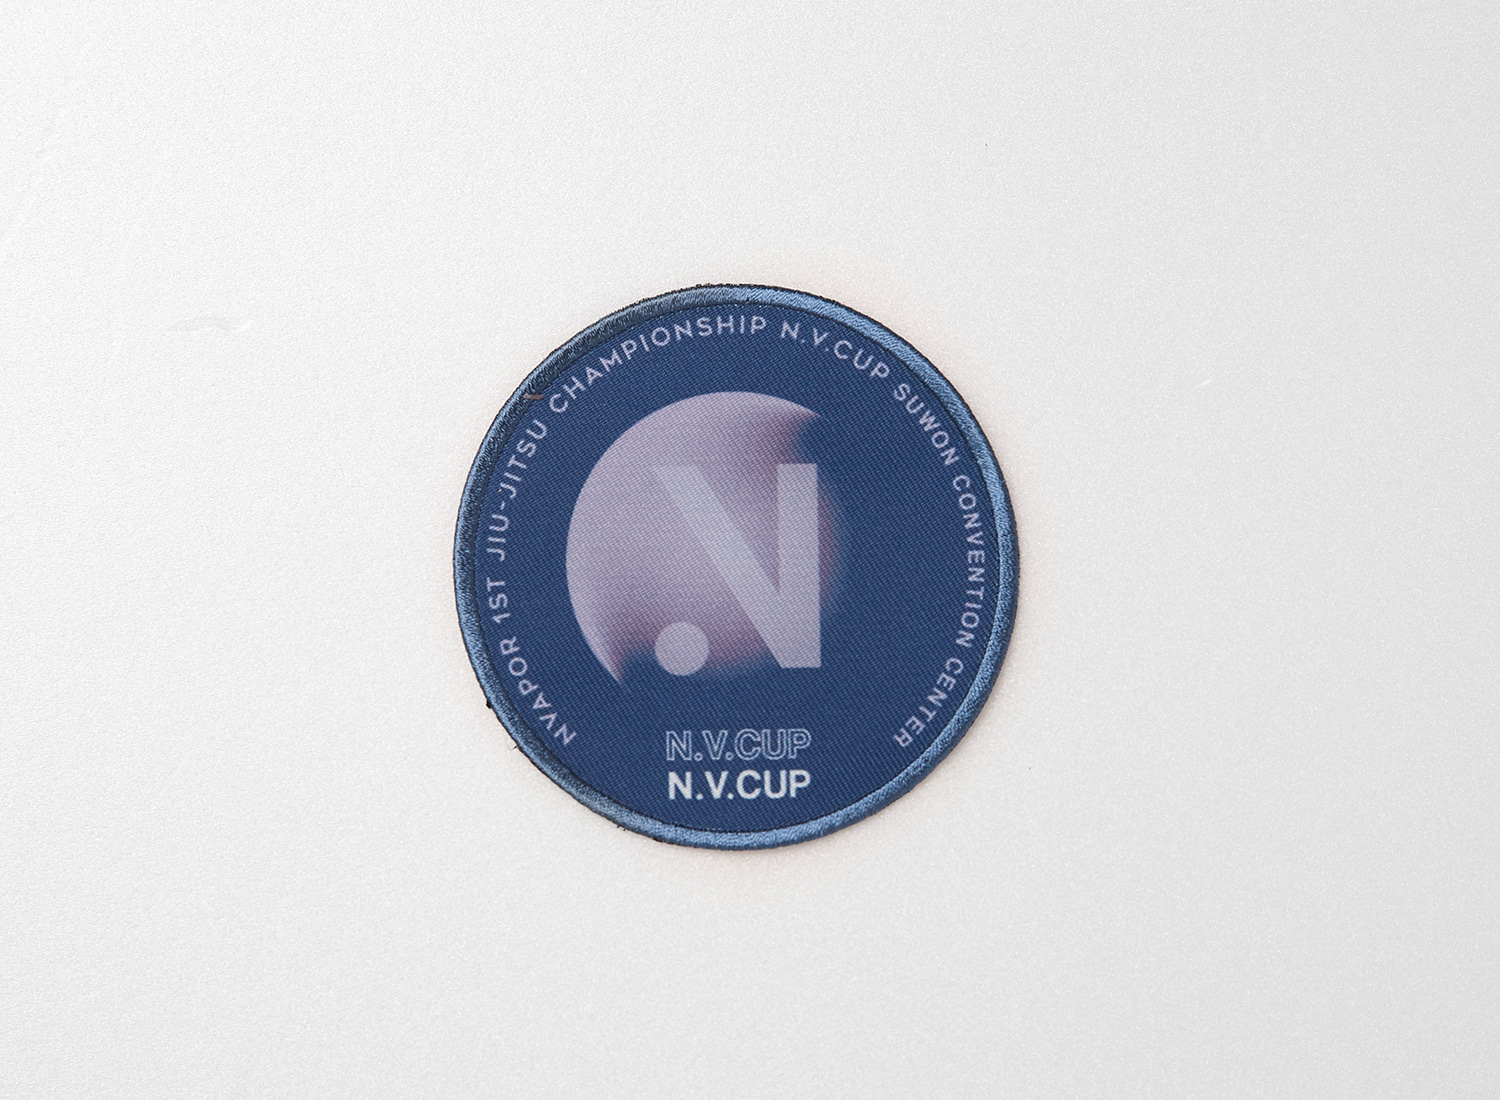 N.V.CUP Patch